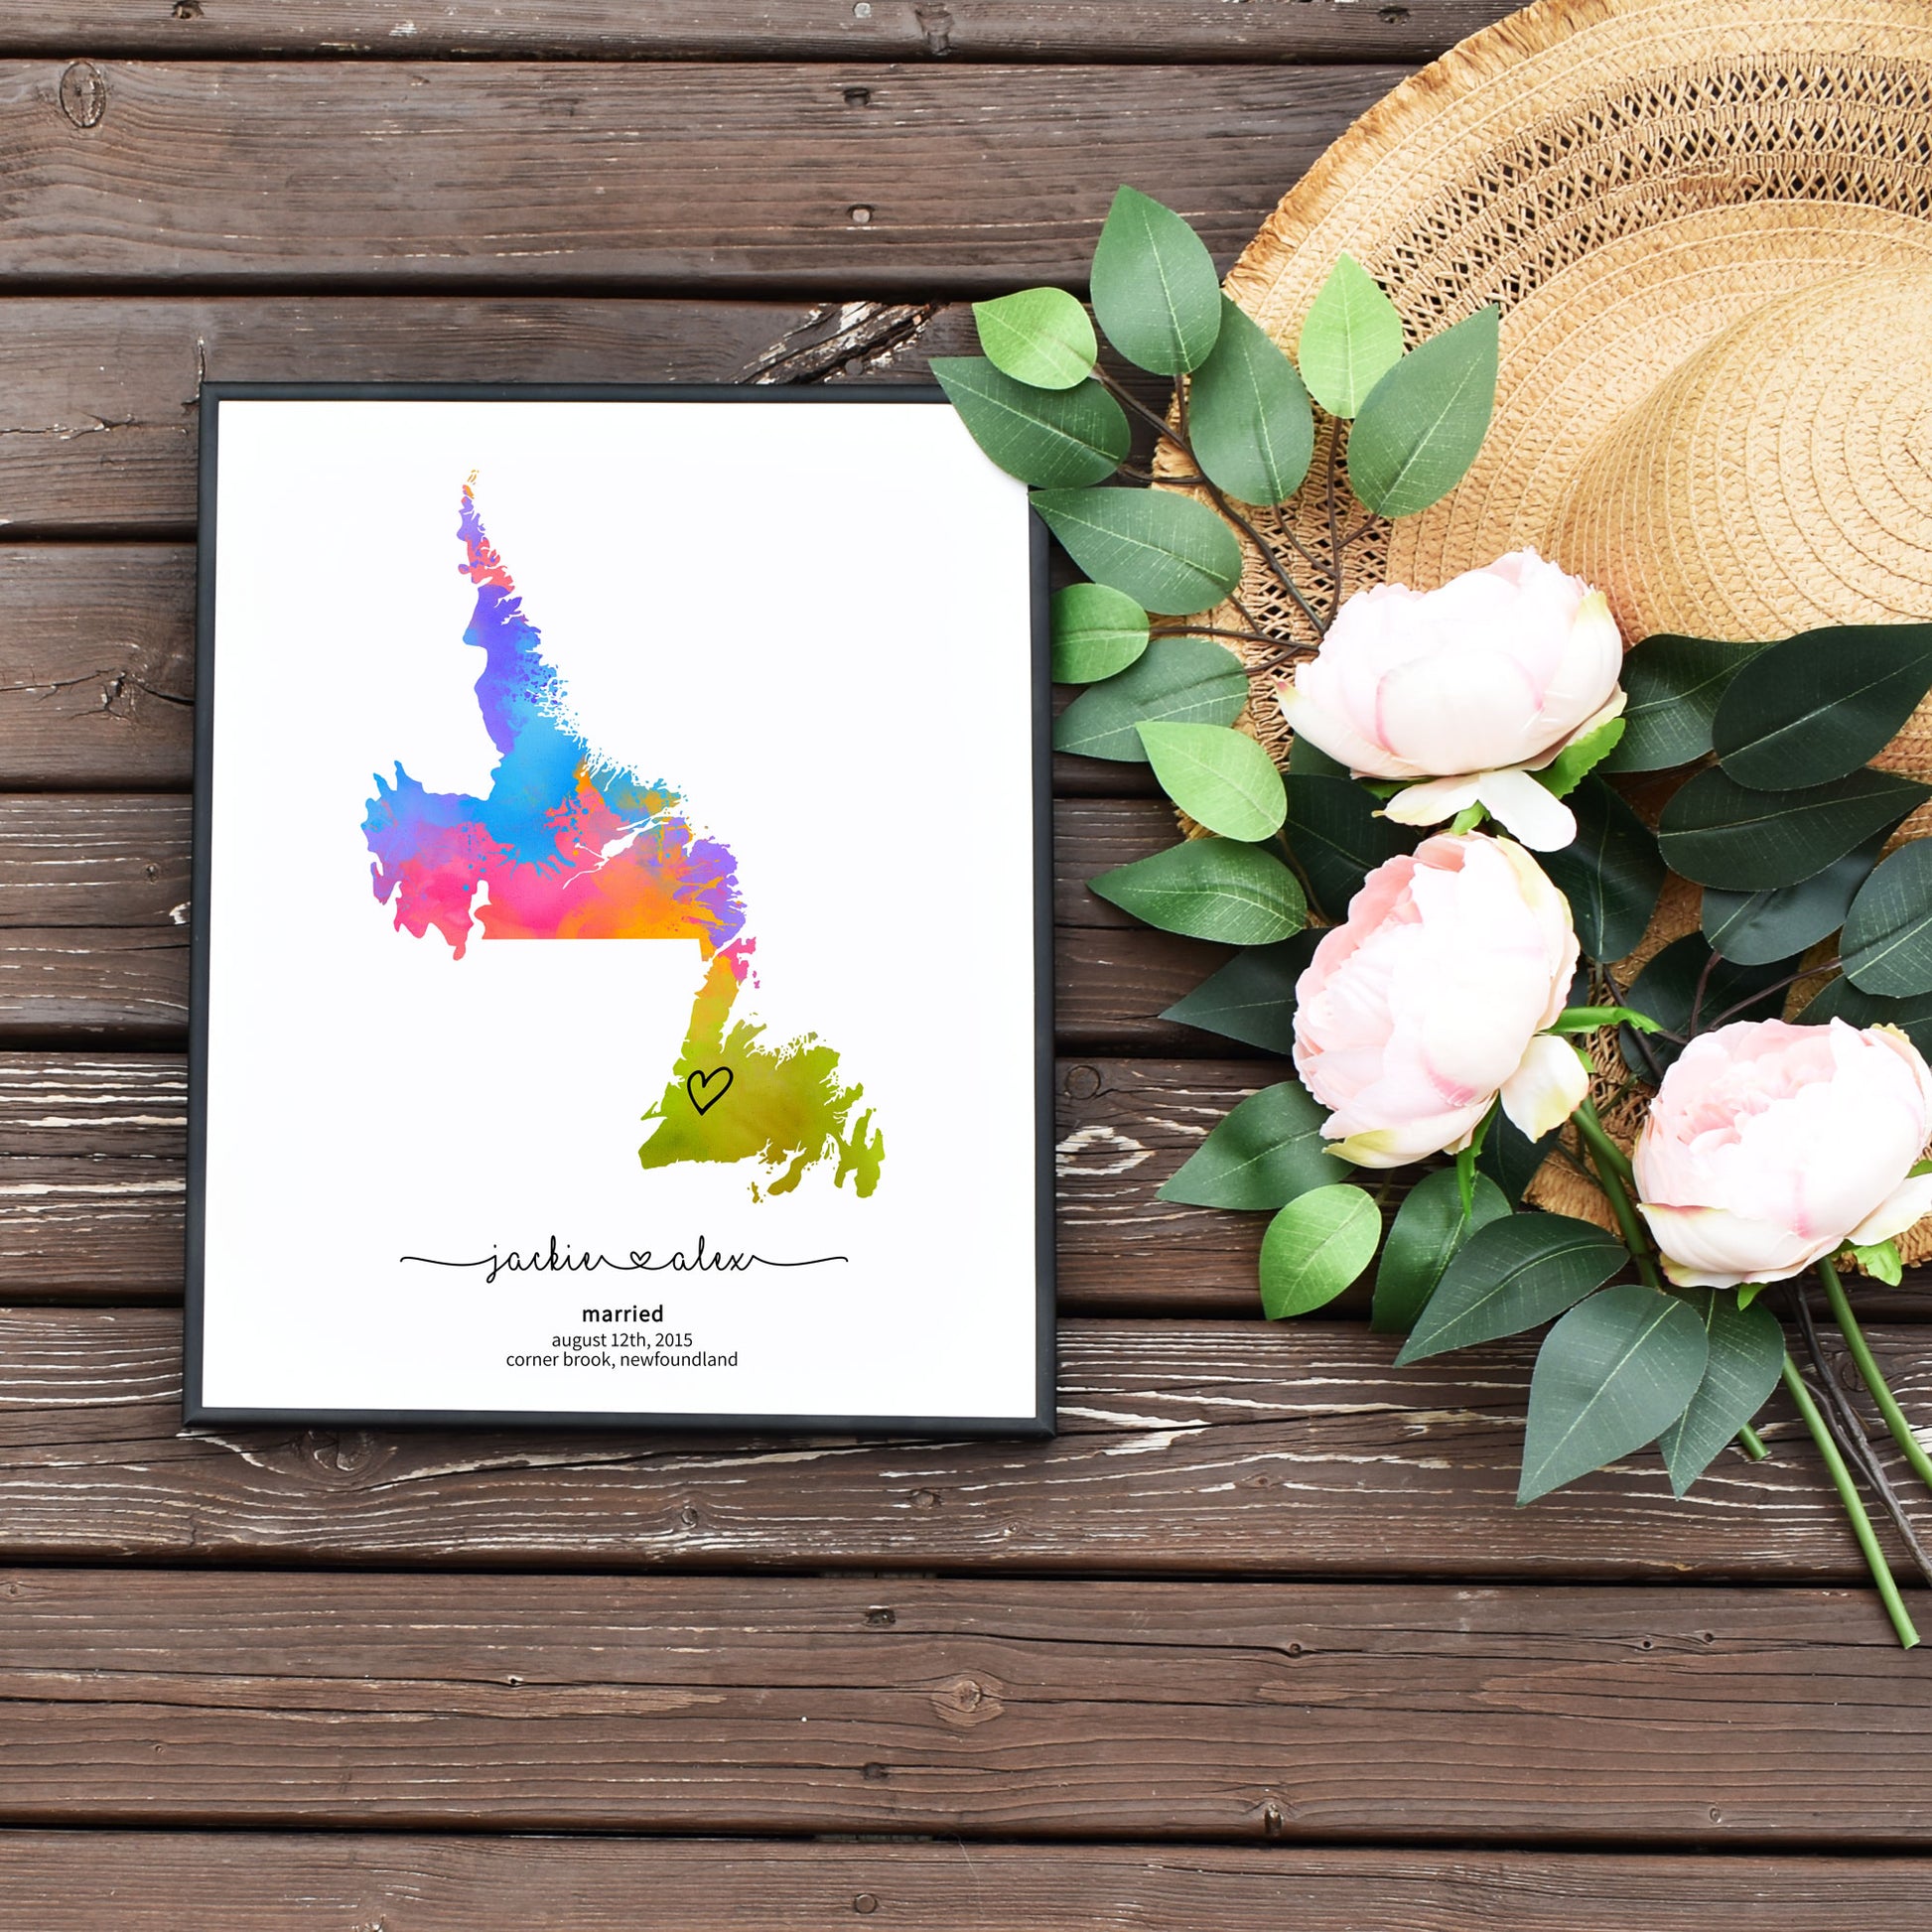 Easy Editable Newfoundland and Labrador Map Template by Playful Pixie Studio